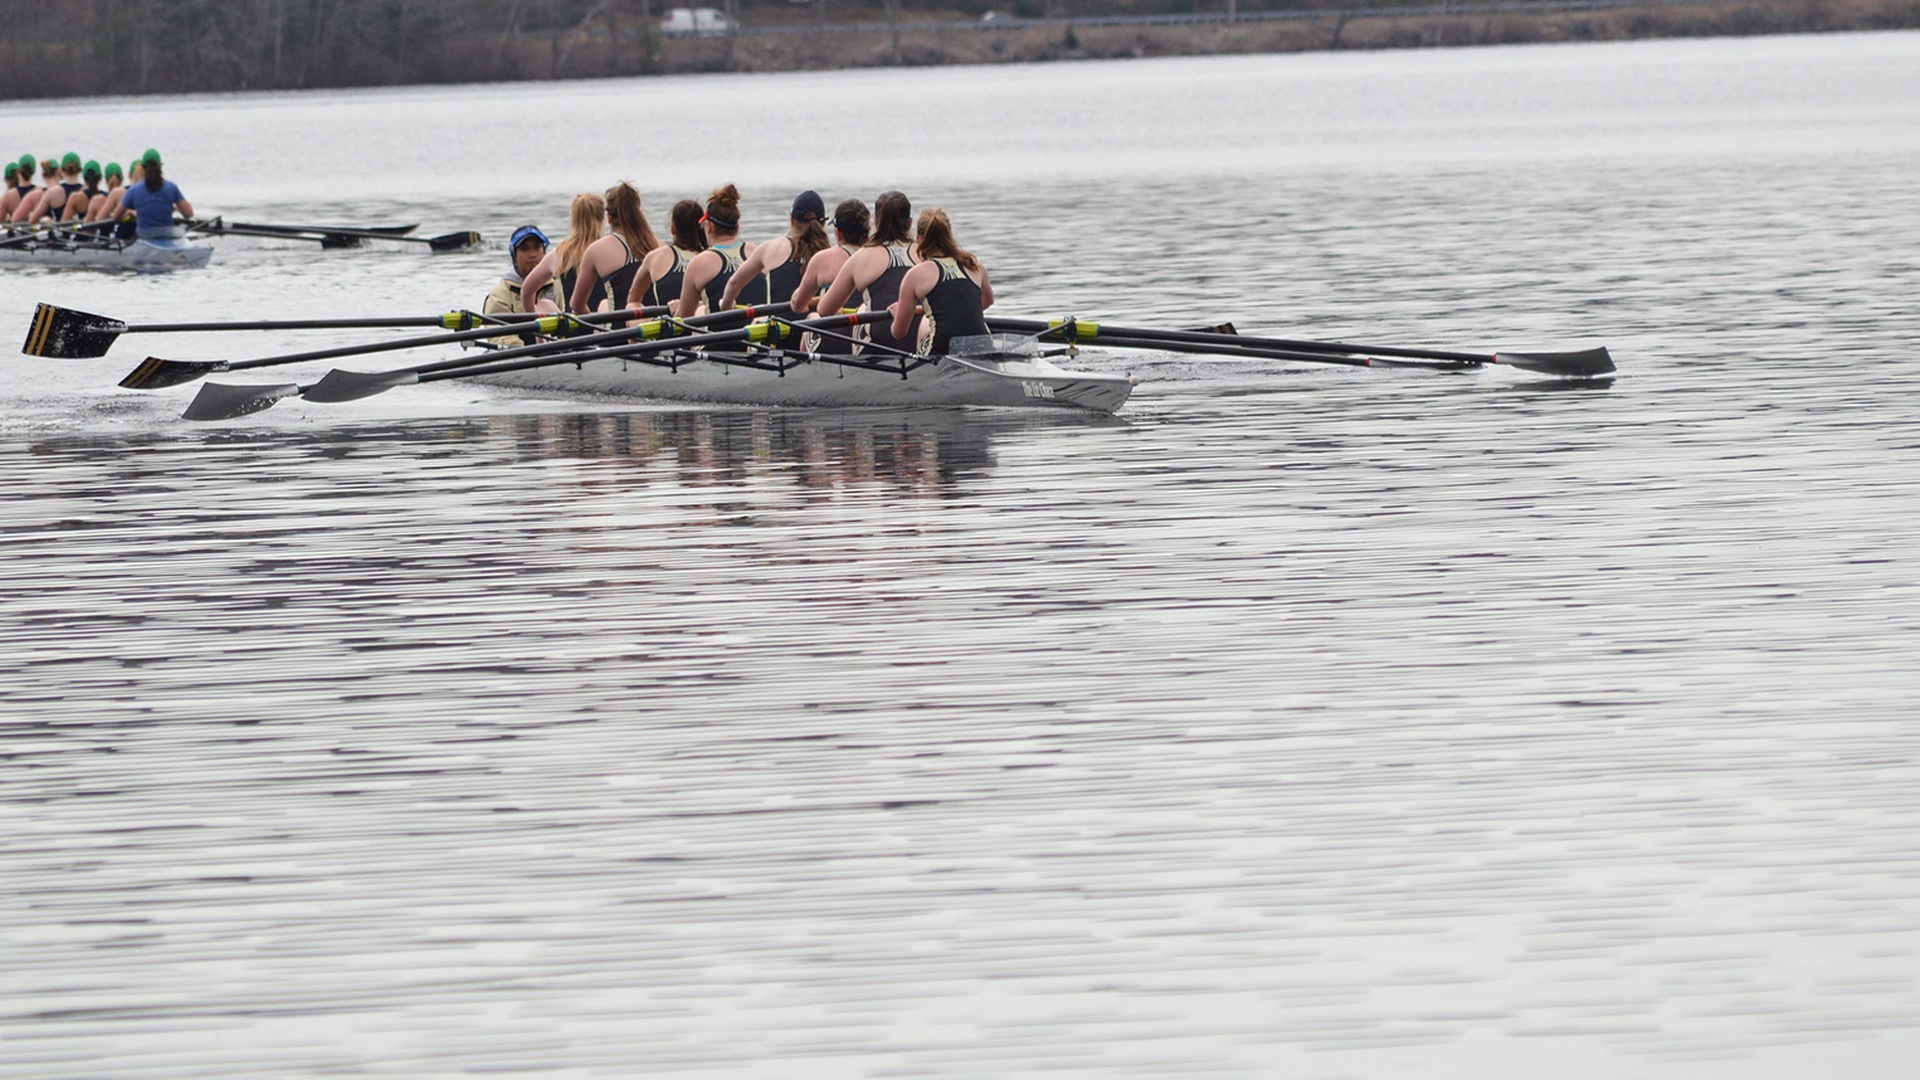 ROWING PARTICIPATES IN FIRST WORMTOWN CHASE REGATTA